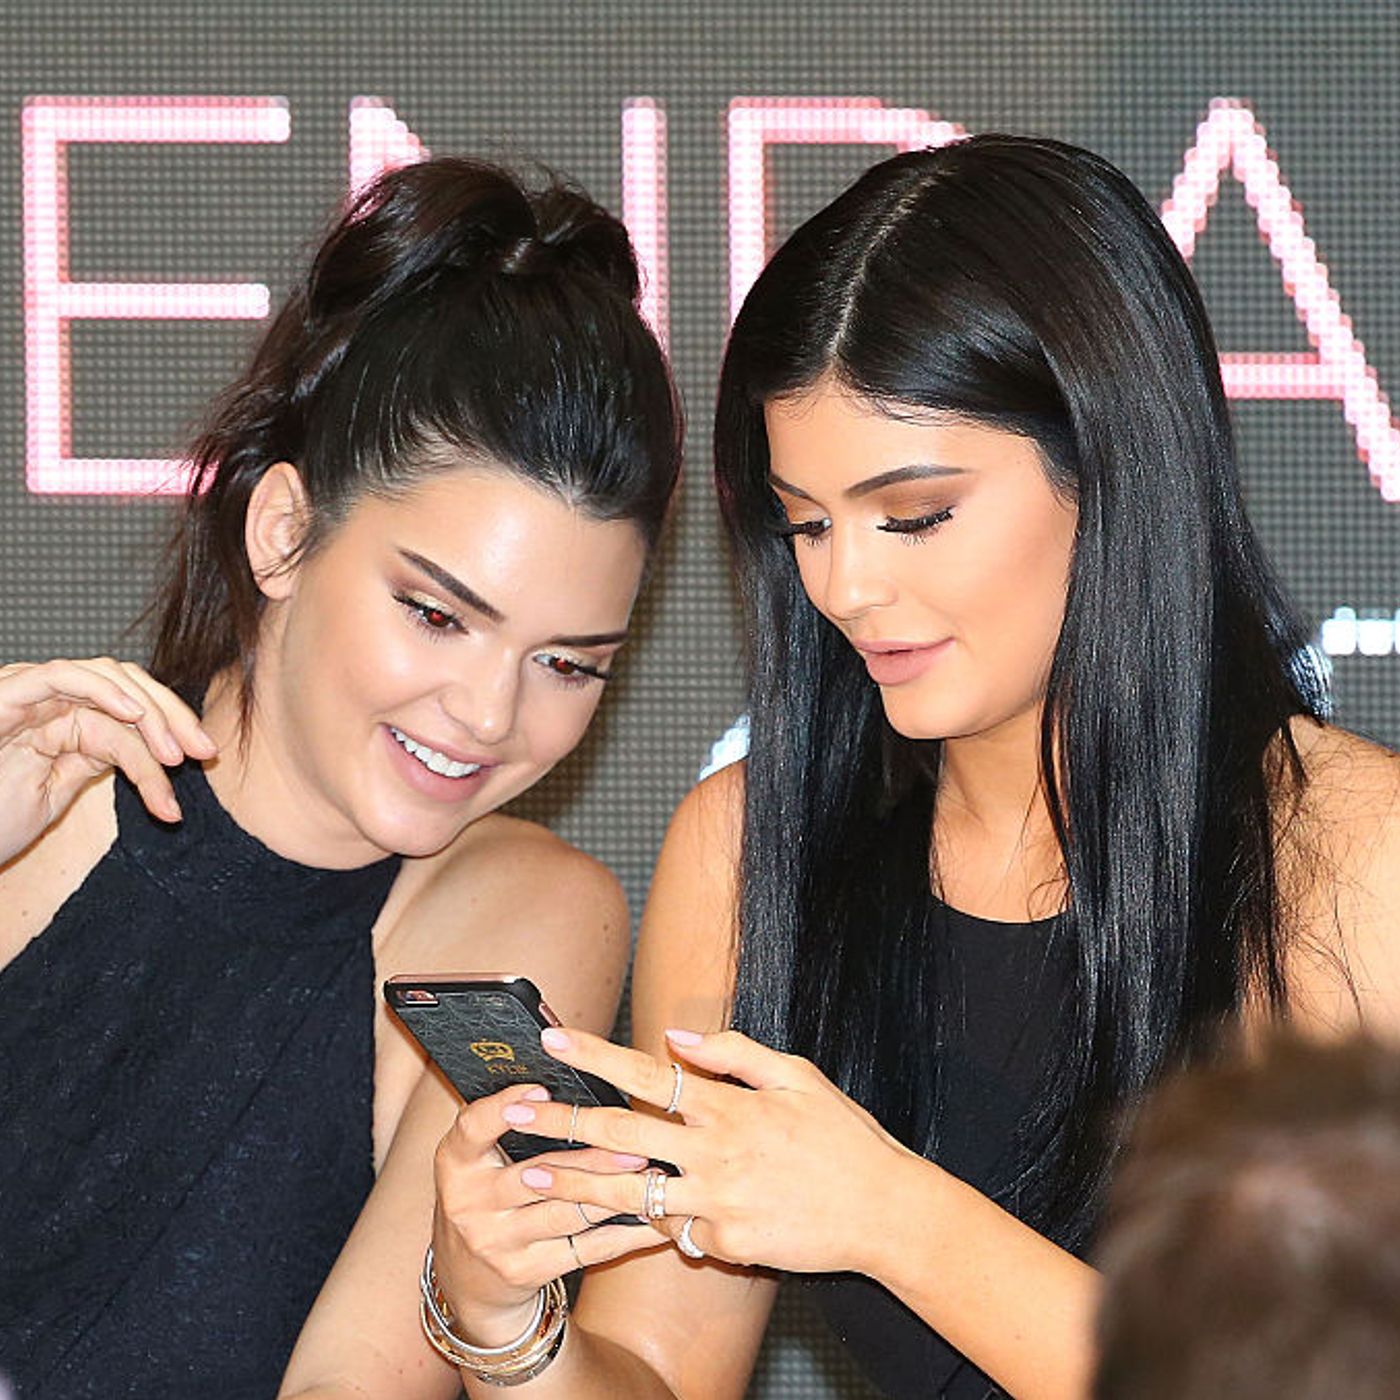 Why Instagram had to keep up with the Kardashians